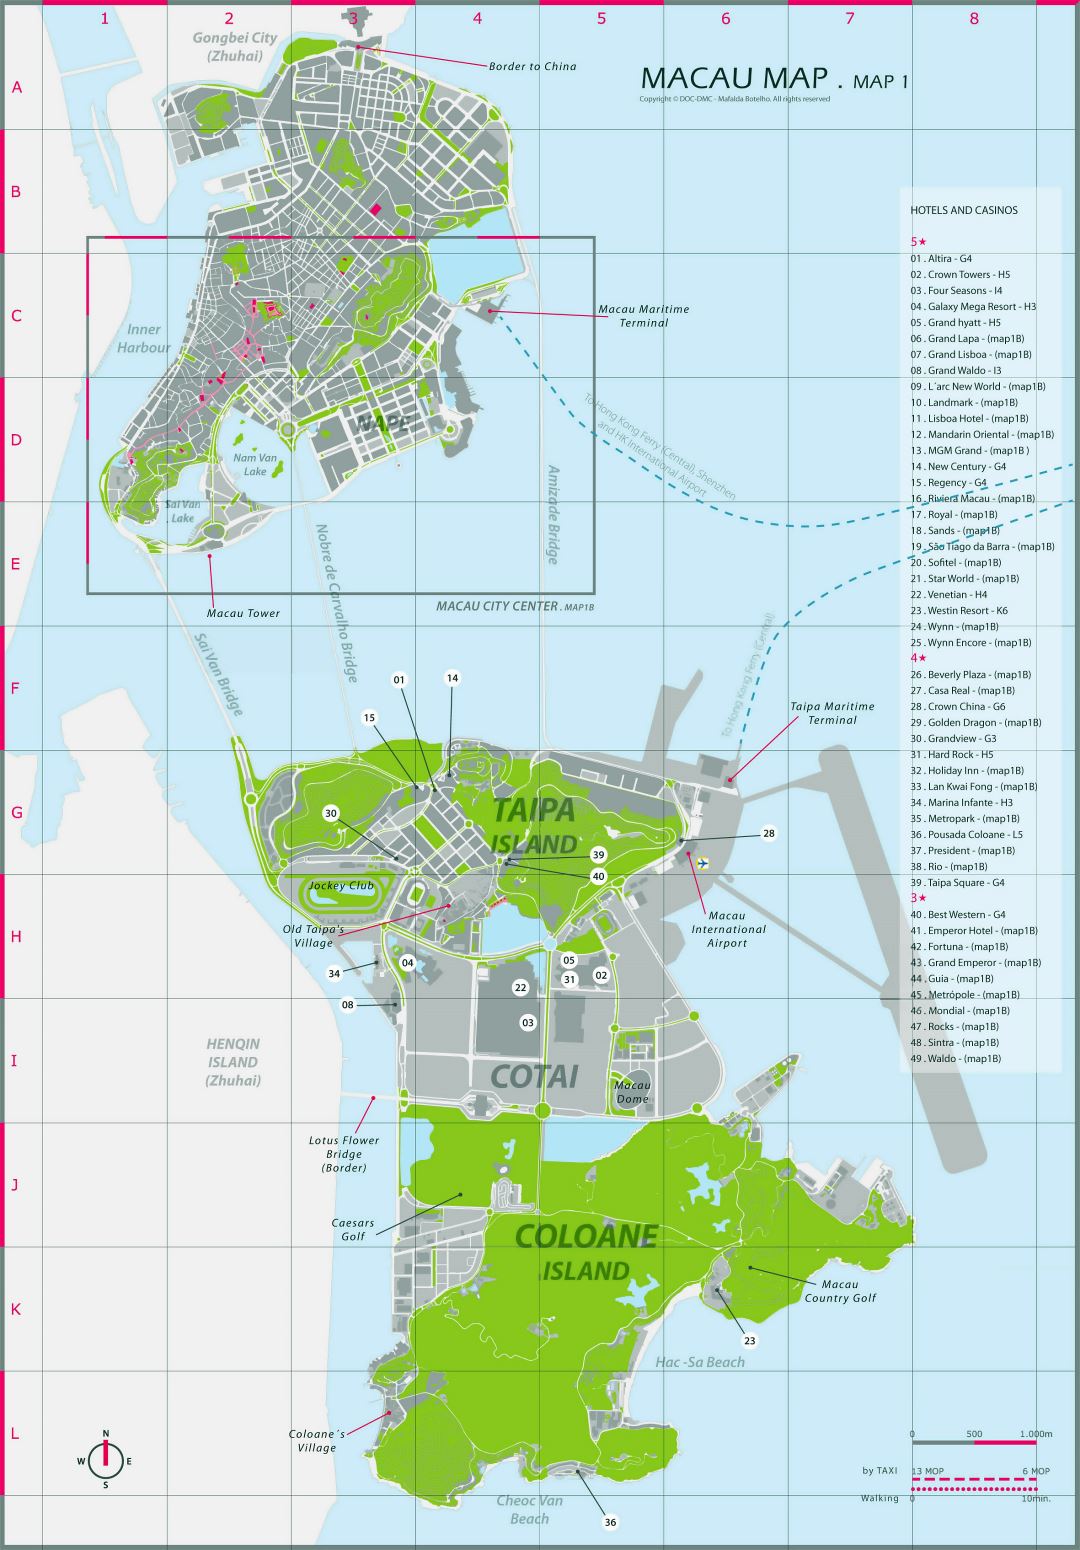 Large hotels and casinos map of Macau